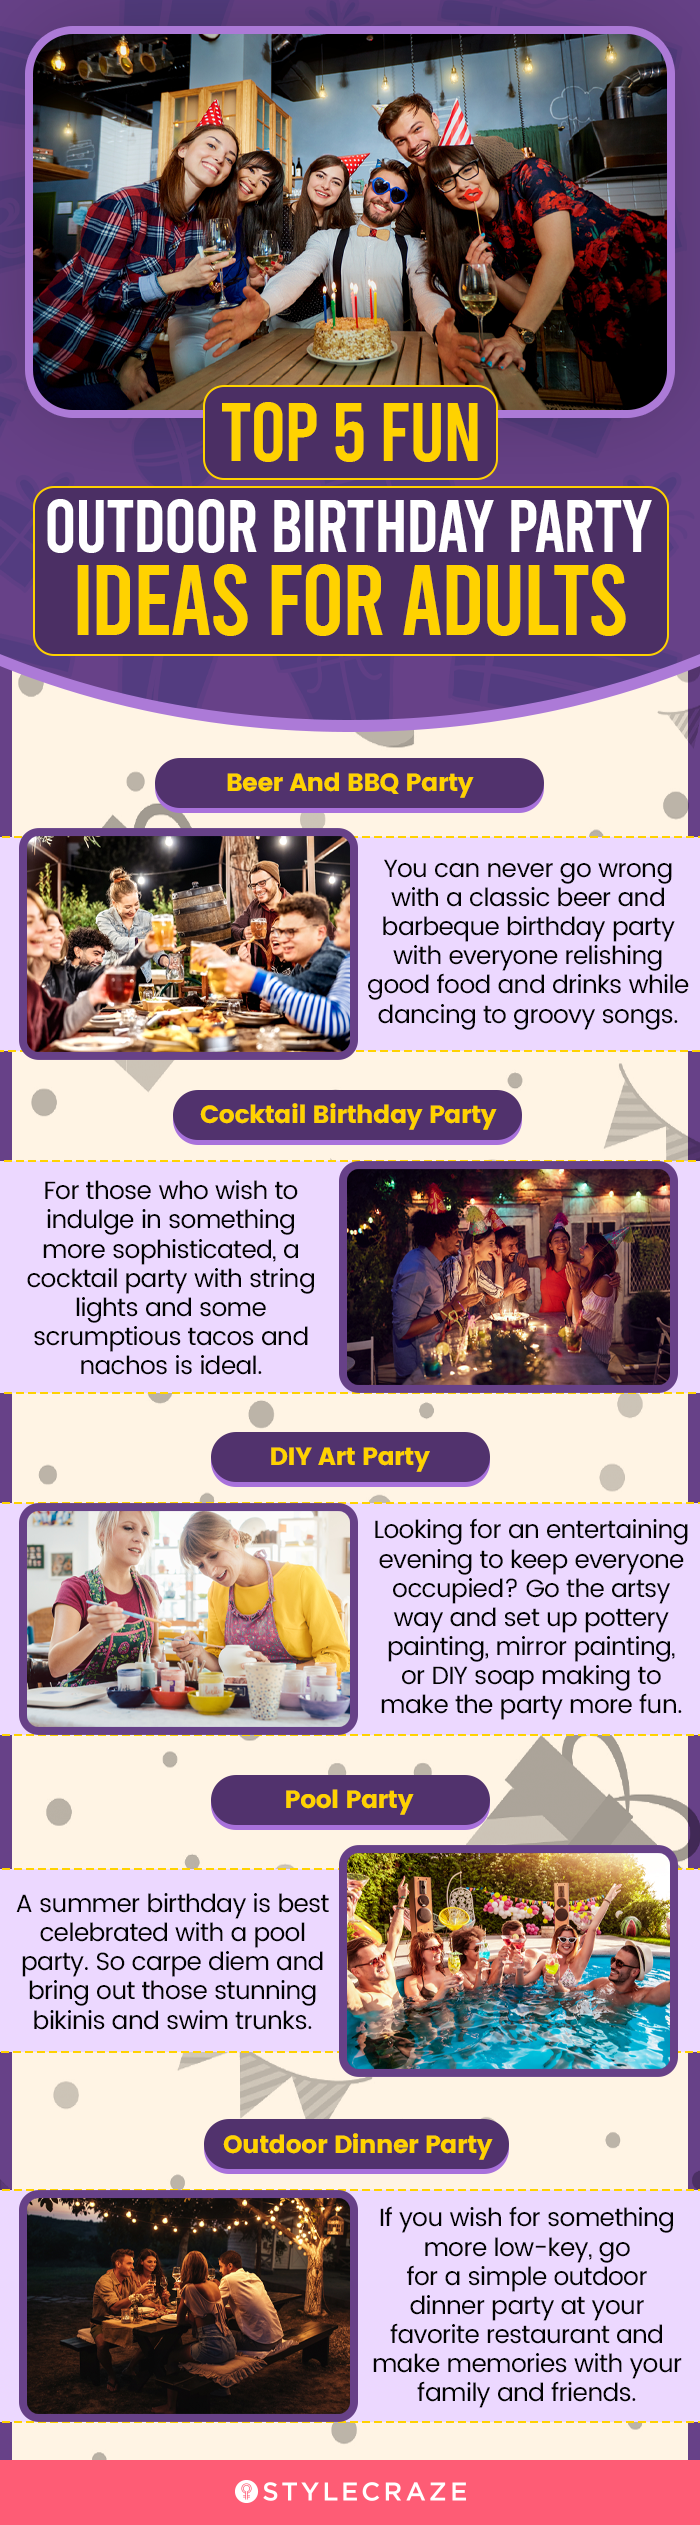 top 5 fun outdoor birthday party ideas for adults (infographic)